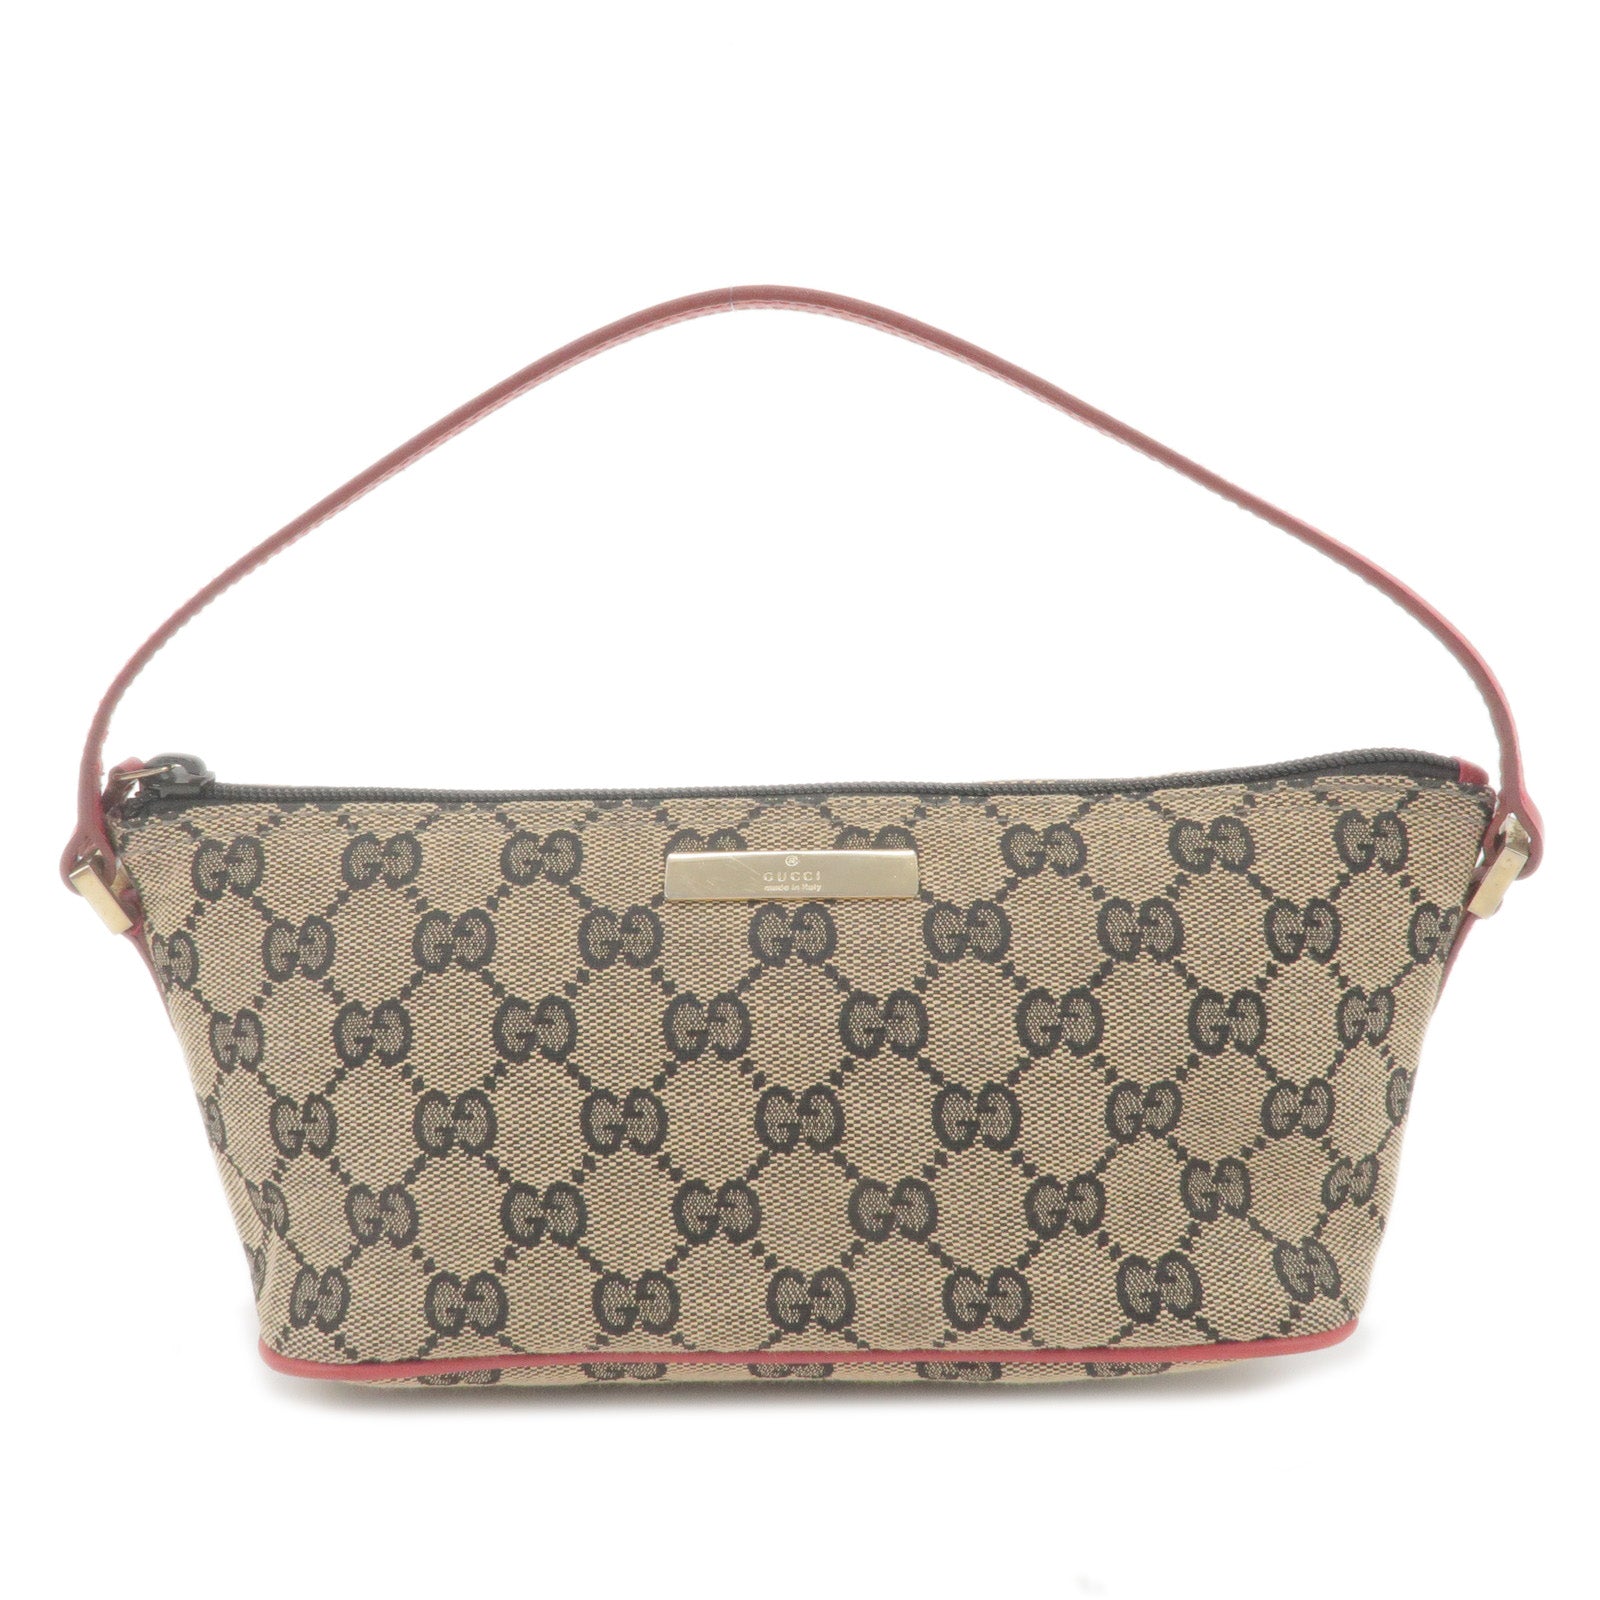 GUCCI-GG-Canvas-Leather-Boat-Bag-Hand-Bag-Black-Red-039.1103